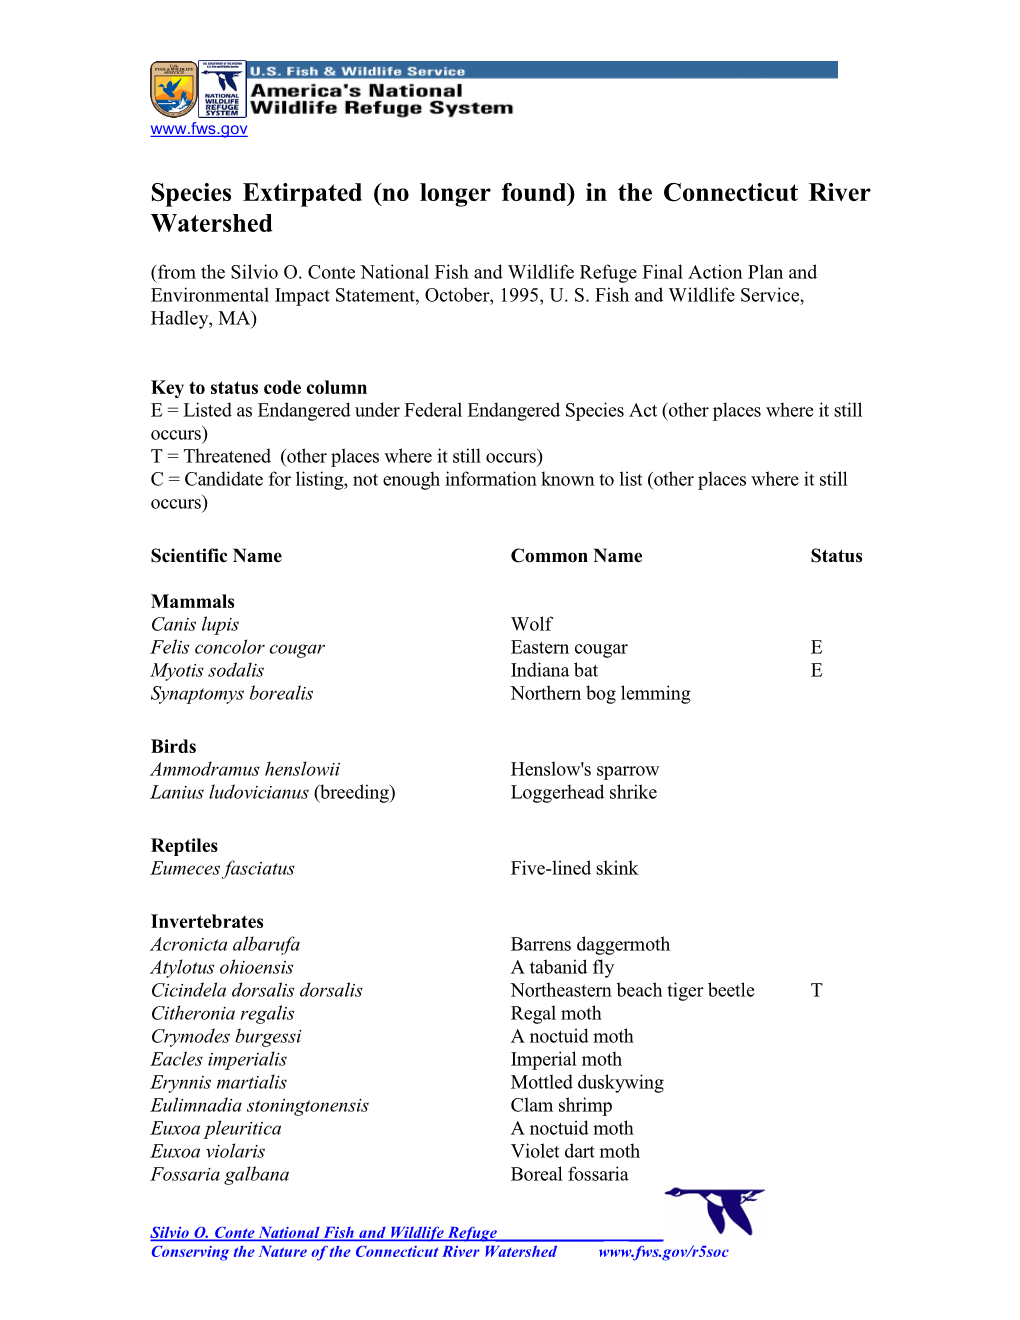 Species Extirpated (No Longer Found) in the Connecticut River Watershed